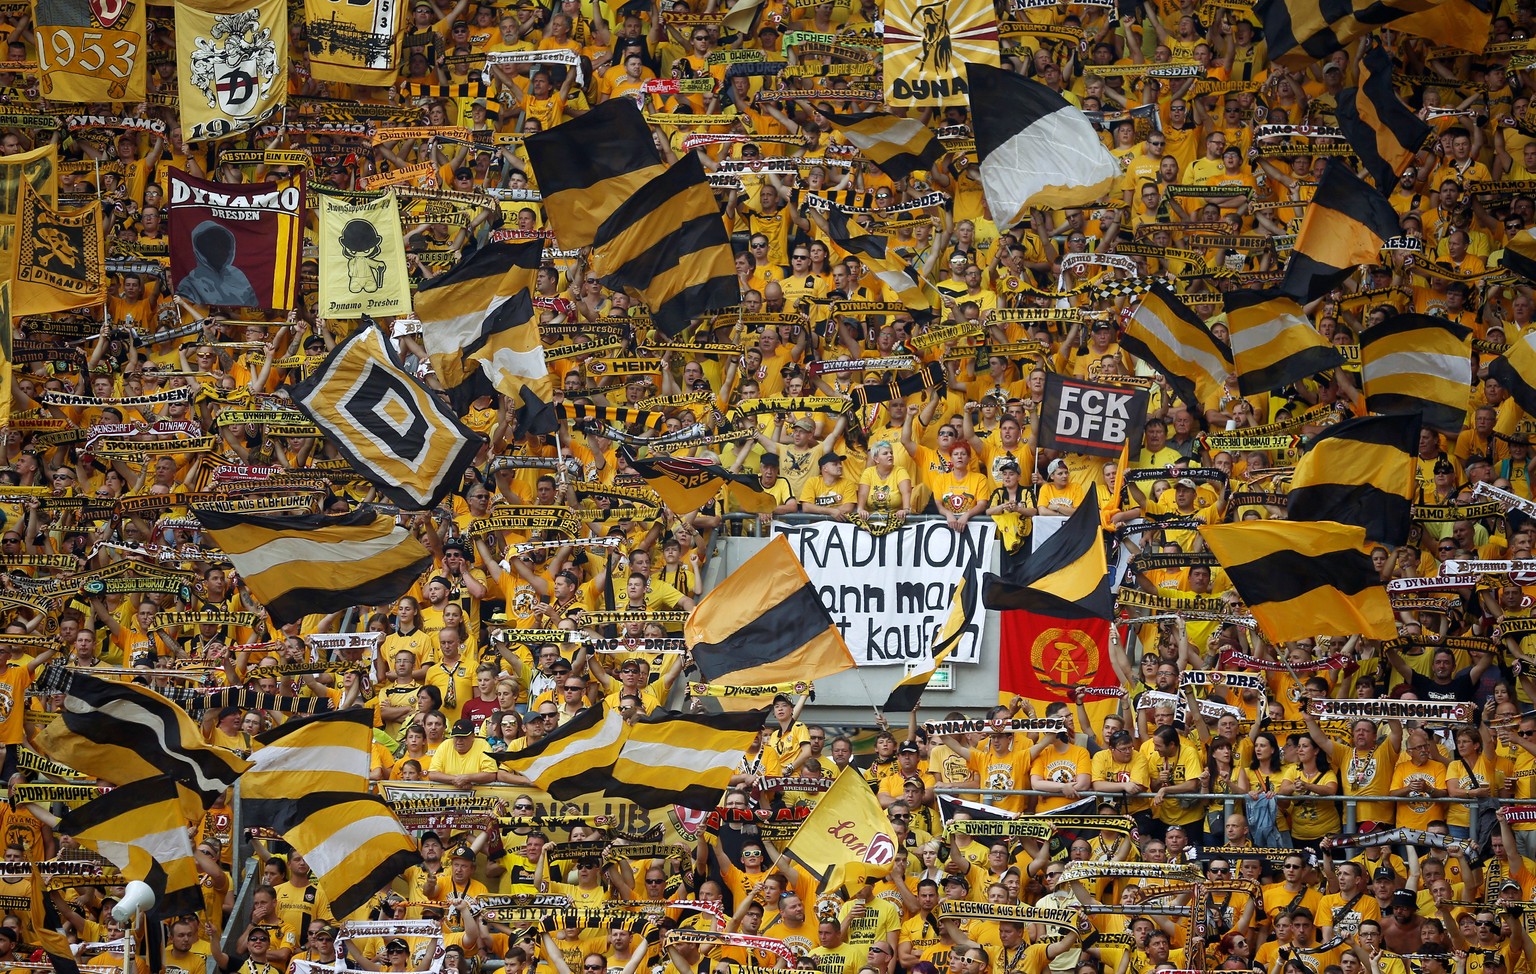 Football Soccer - Dynamo Dresden v RB Leipzig - German Cup (DFB Pokal) - DDV-Stadion, Dresden, Germany - 20/08/16. Dynamo Dresden&#039;s fans display banners and wave flags. REUTERS/Axel Schmidt DFB R ...